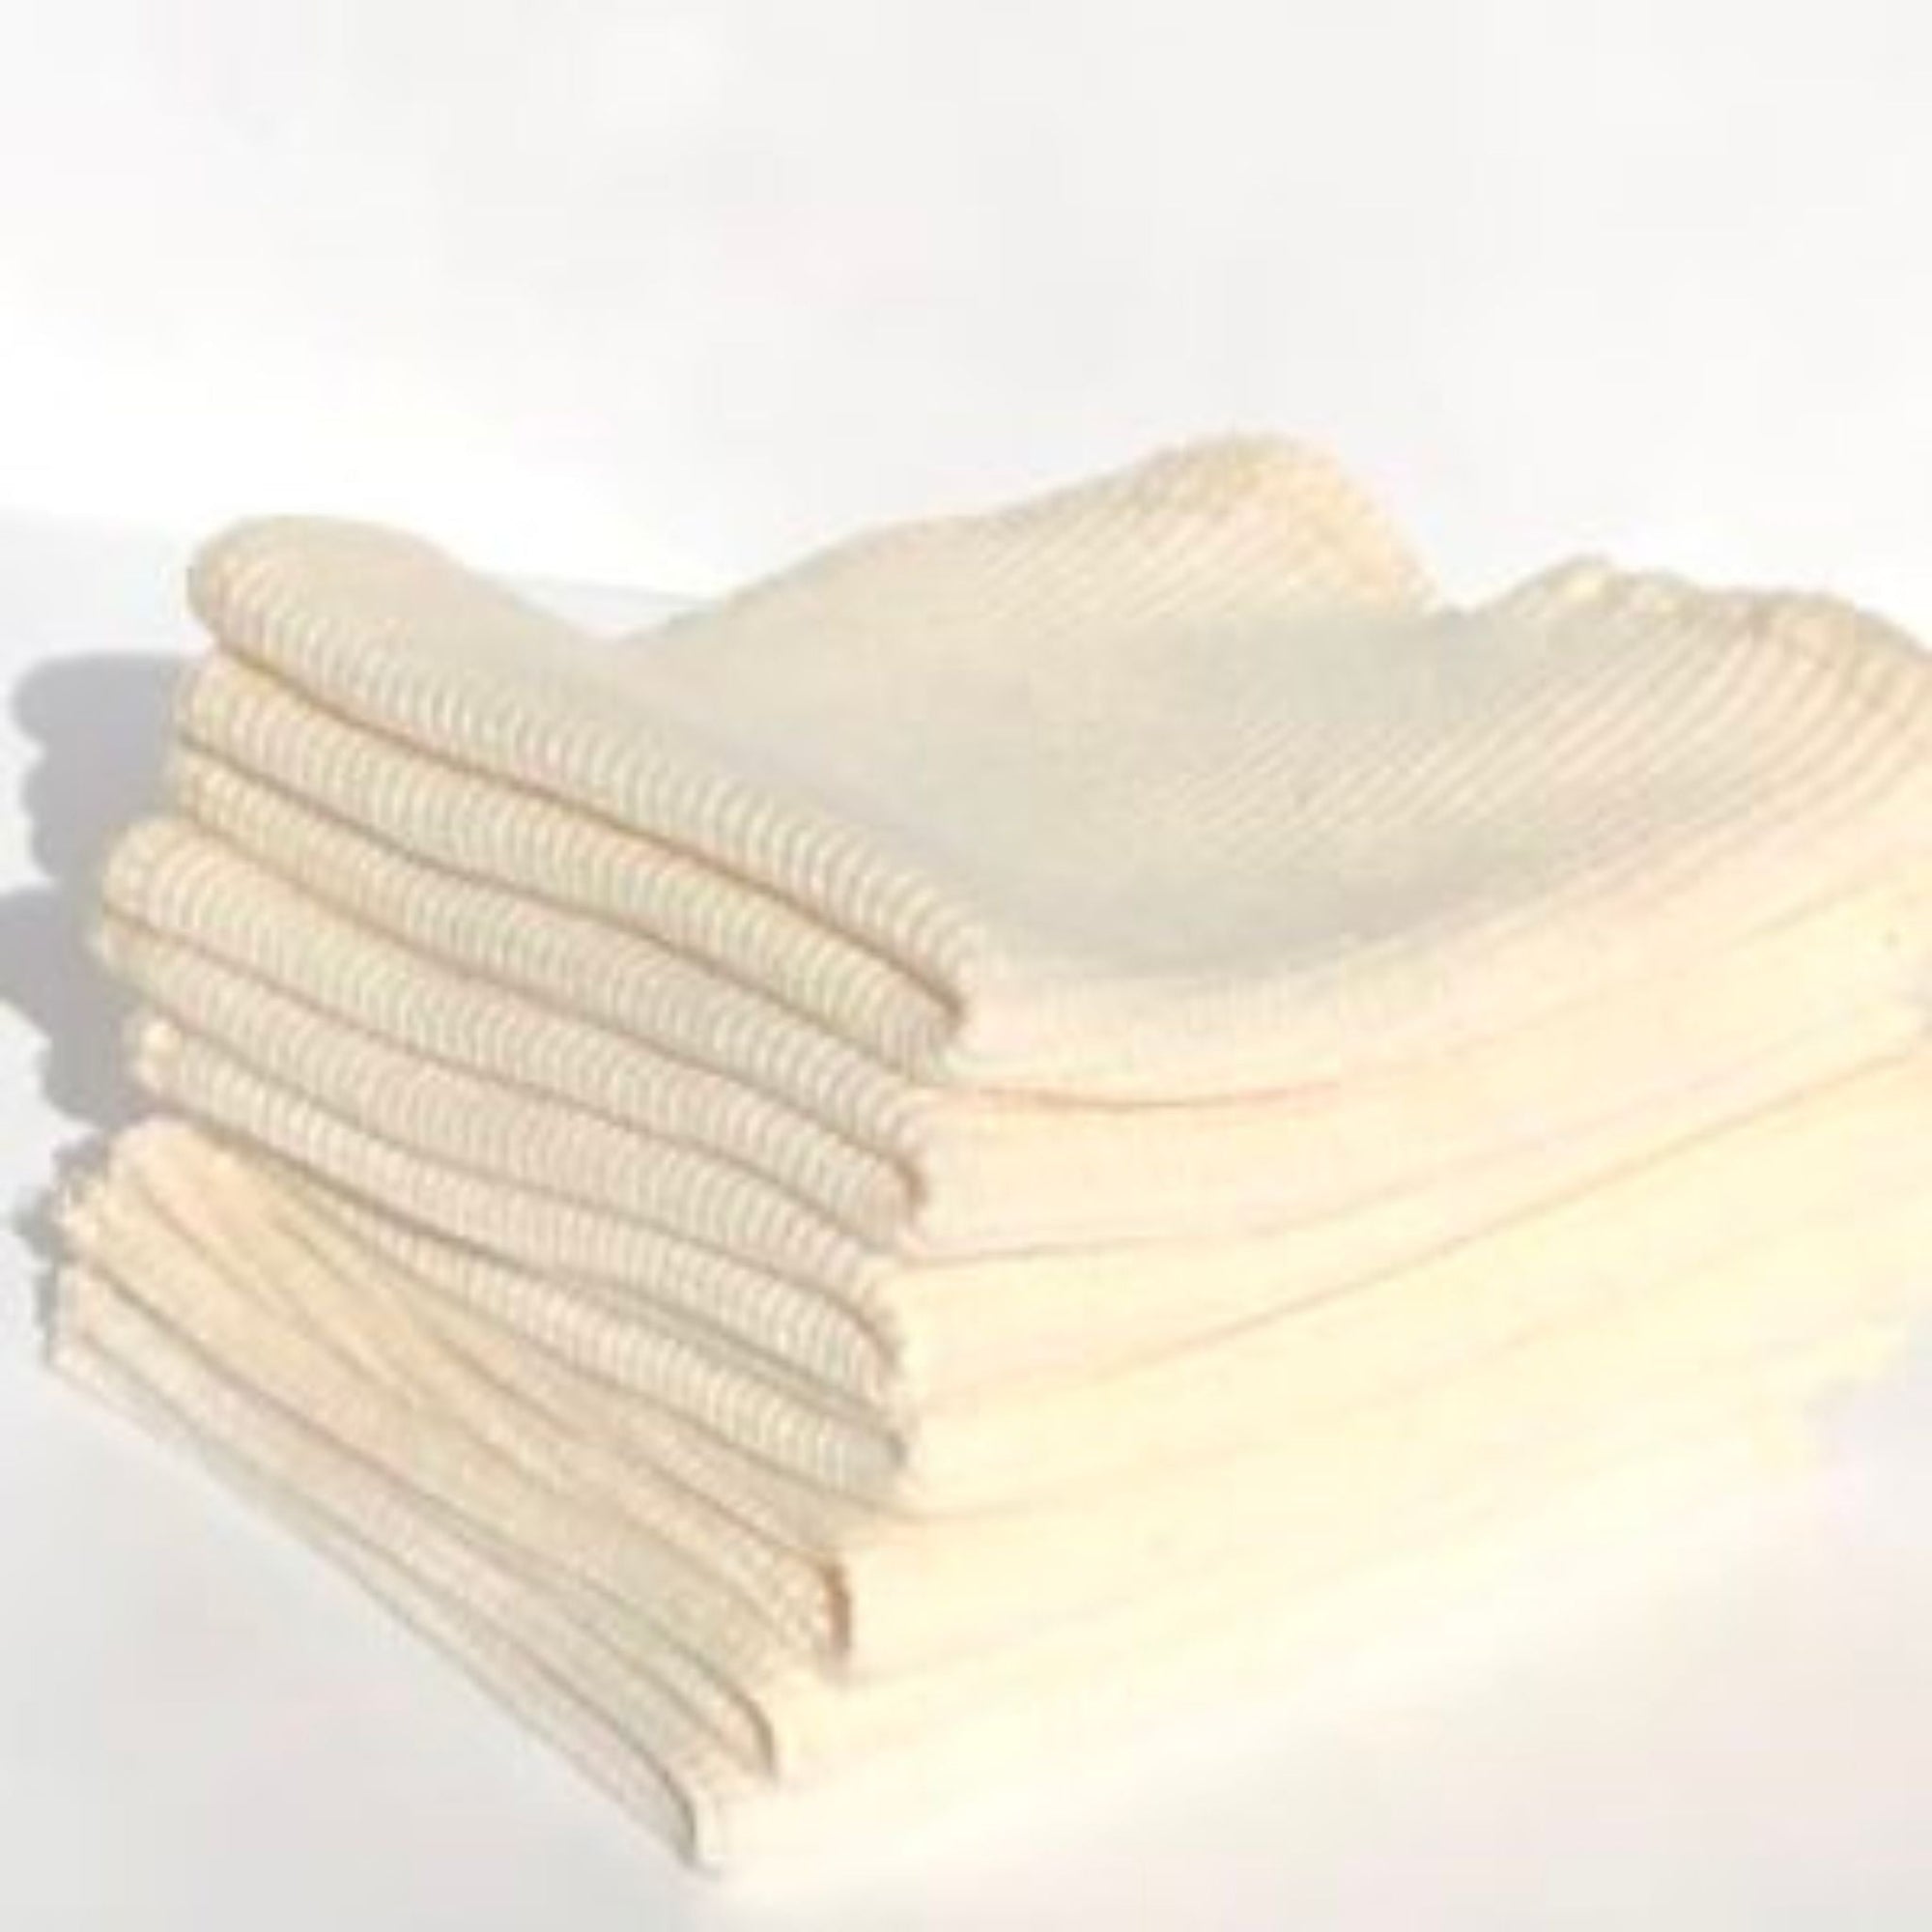 Organics by Heather - Organic Cotton Face Cloth - ORESTA clean beauty simplified